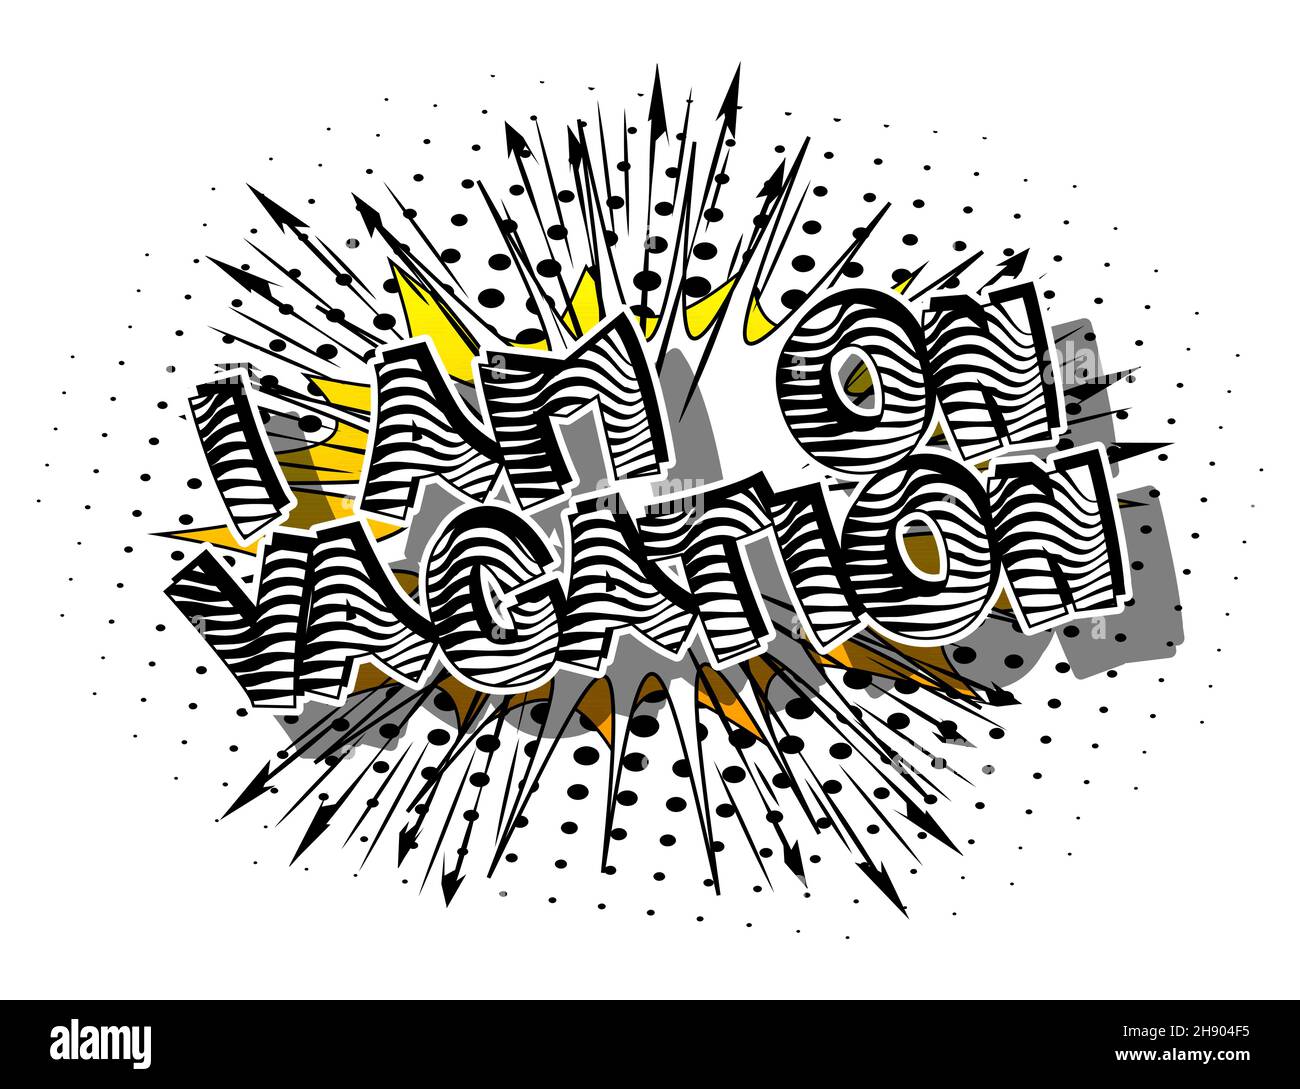 I'm on vacation. Comic book word text on abstract comics background. Retro pop art style illustration. Traveling, holiday, relax, free time concept. Stock Vector